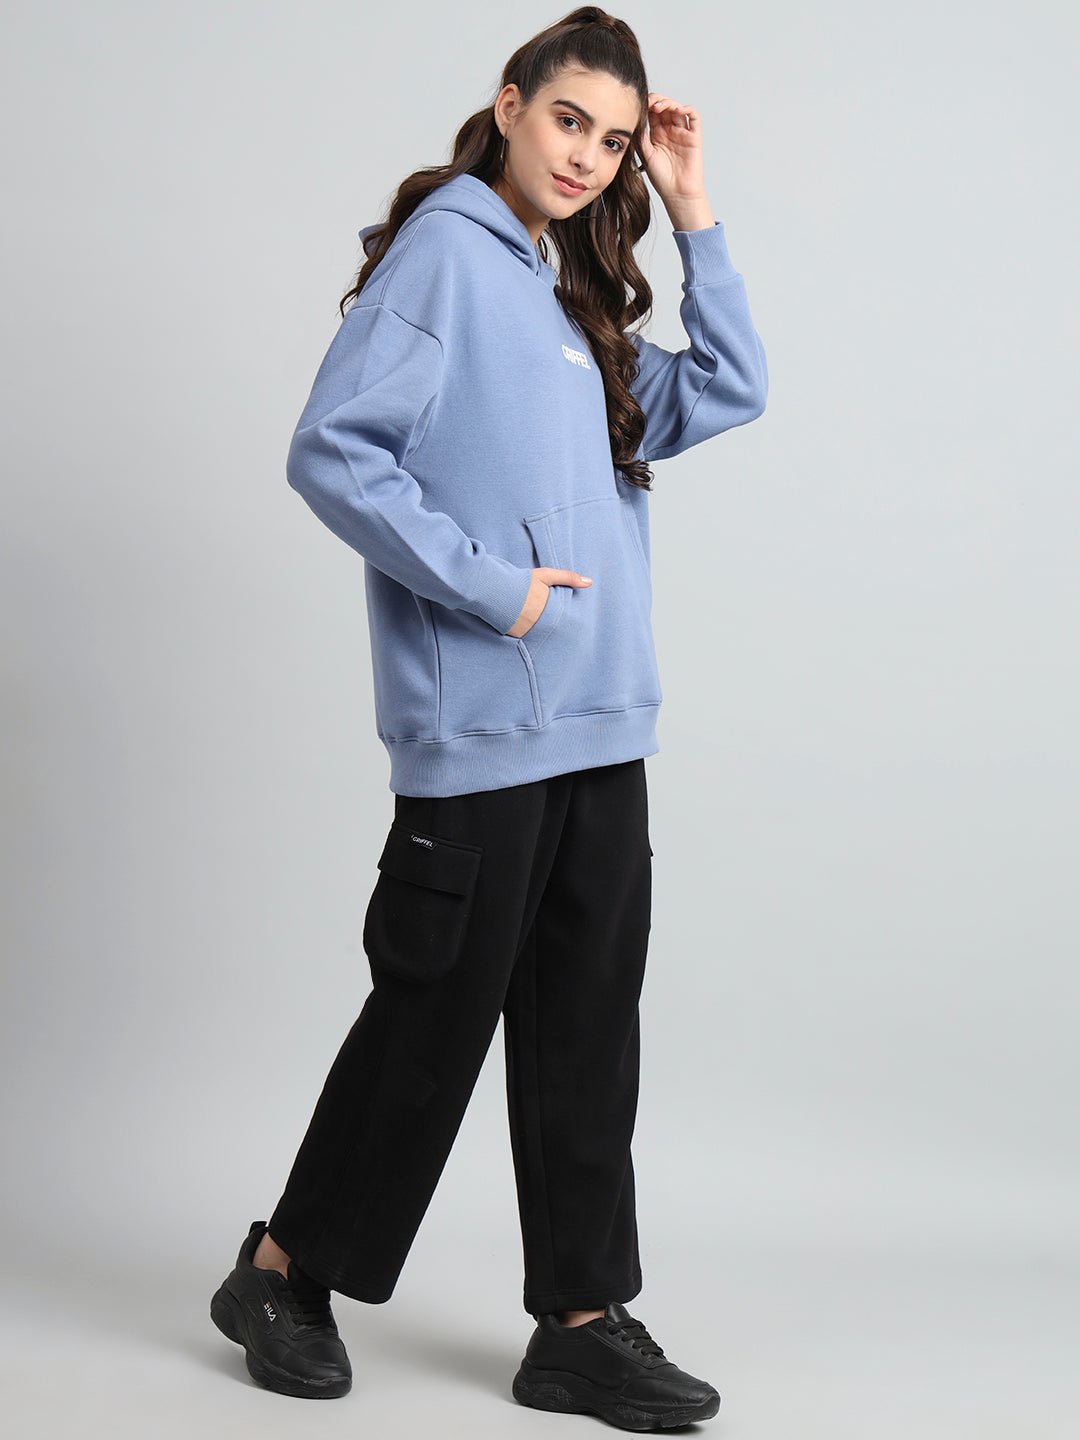 Griffel Women Oversized Fit Front Logo 100% Cotton Black Fleece Hoodie and trackpant - griffel